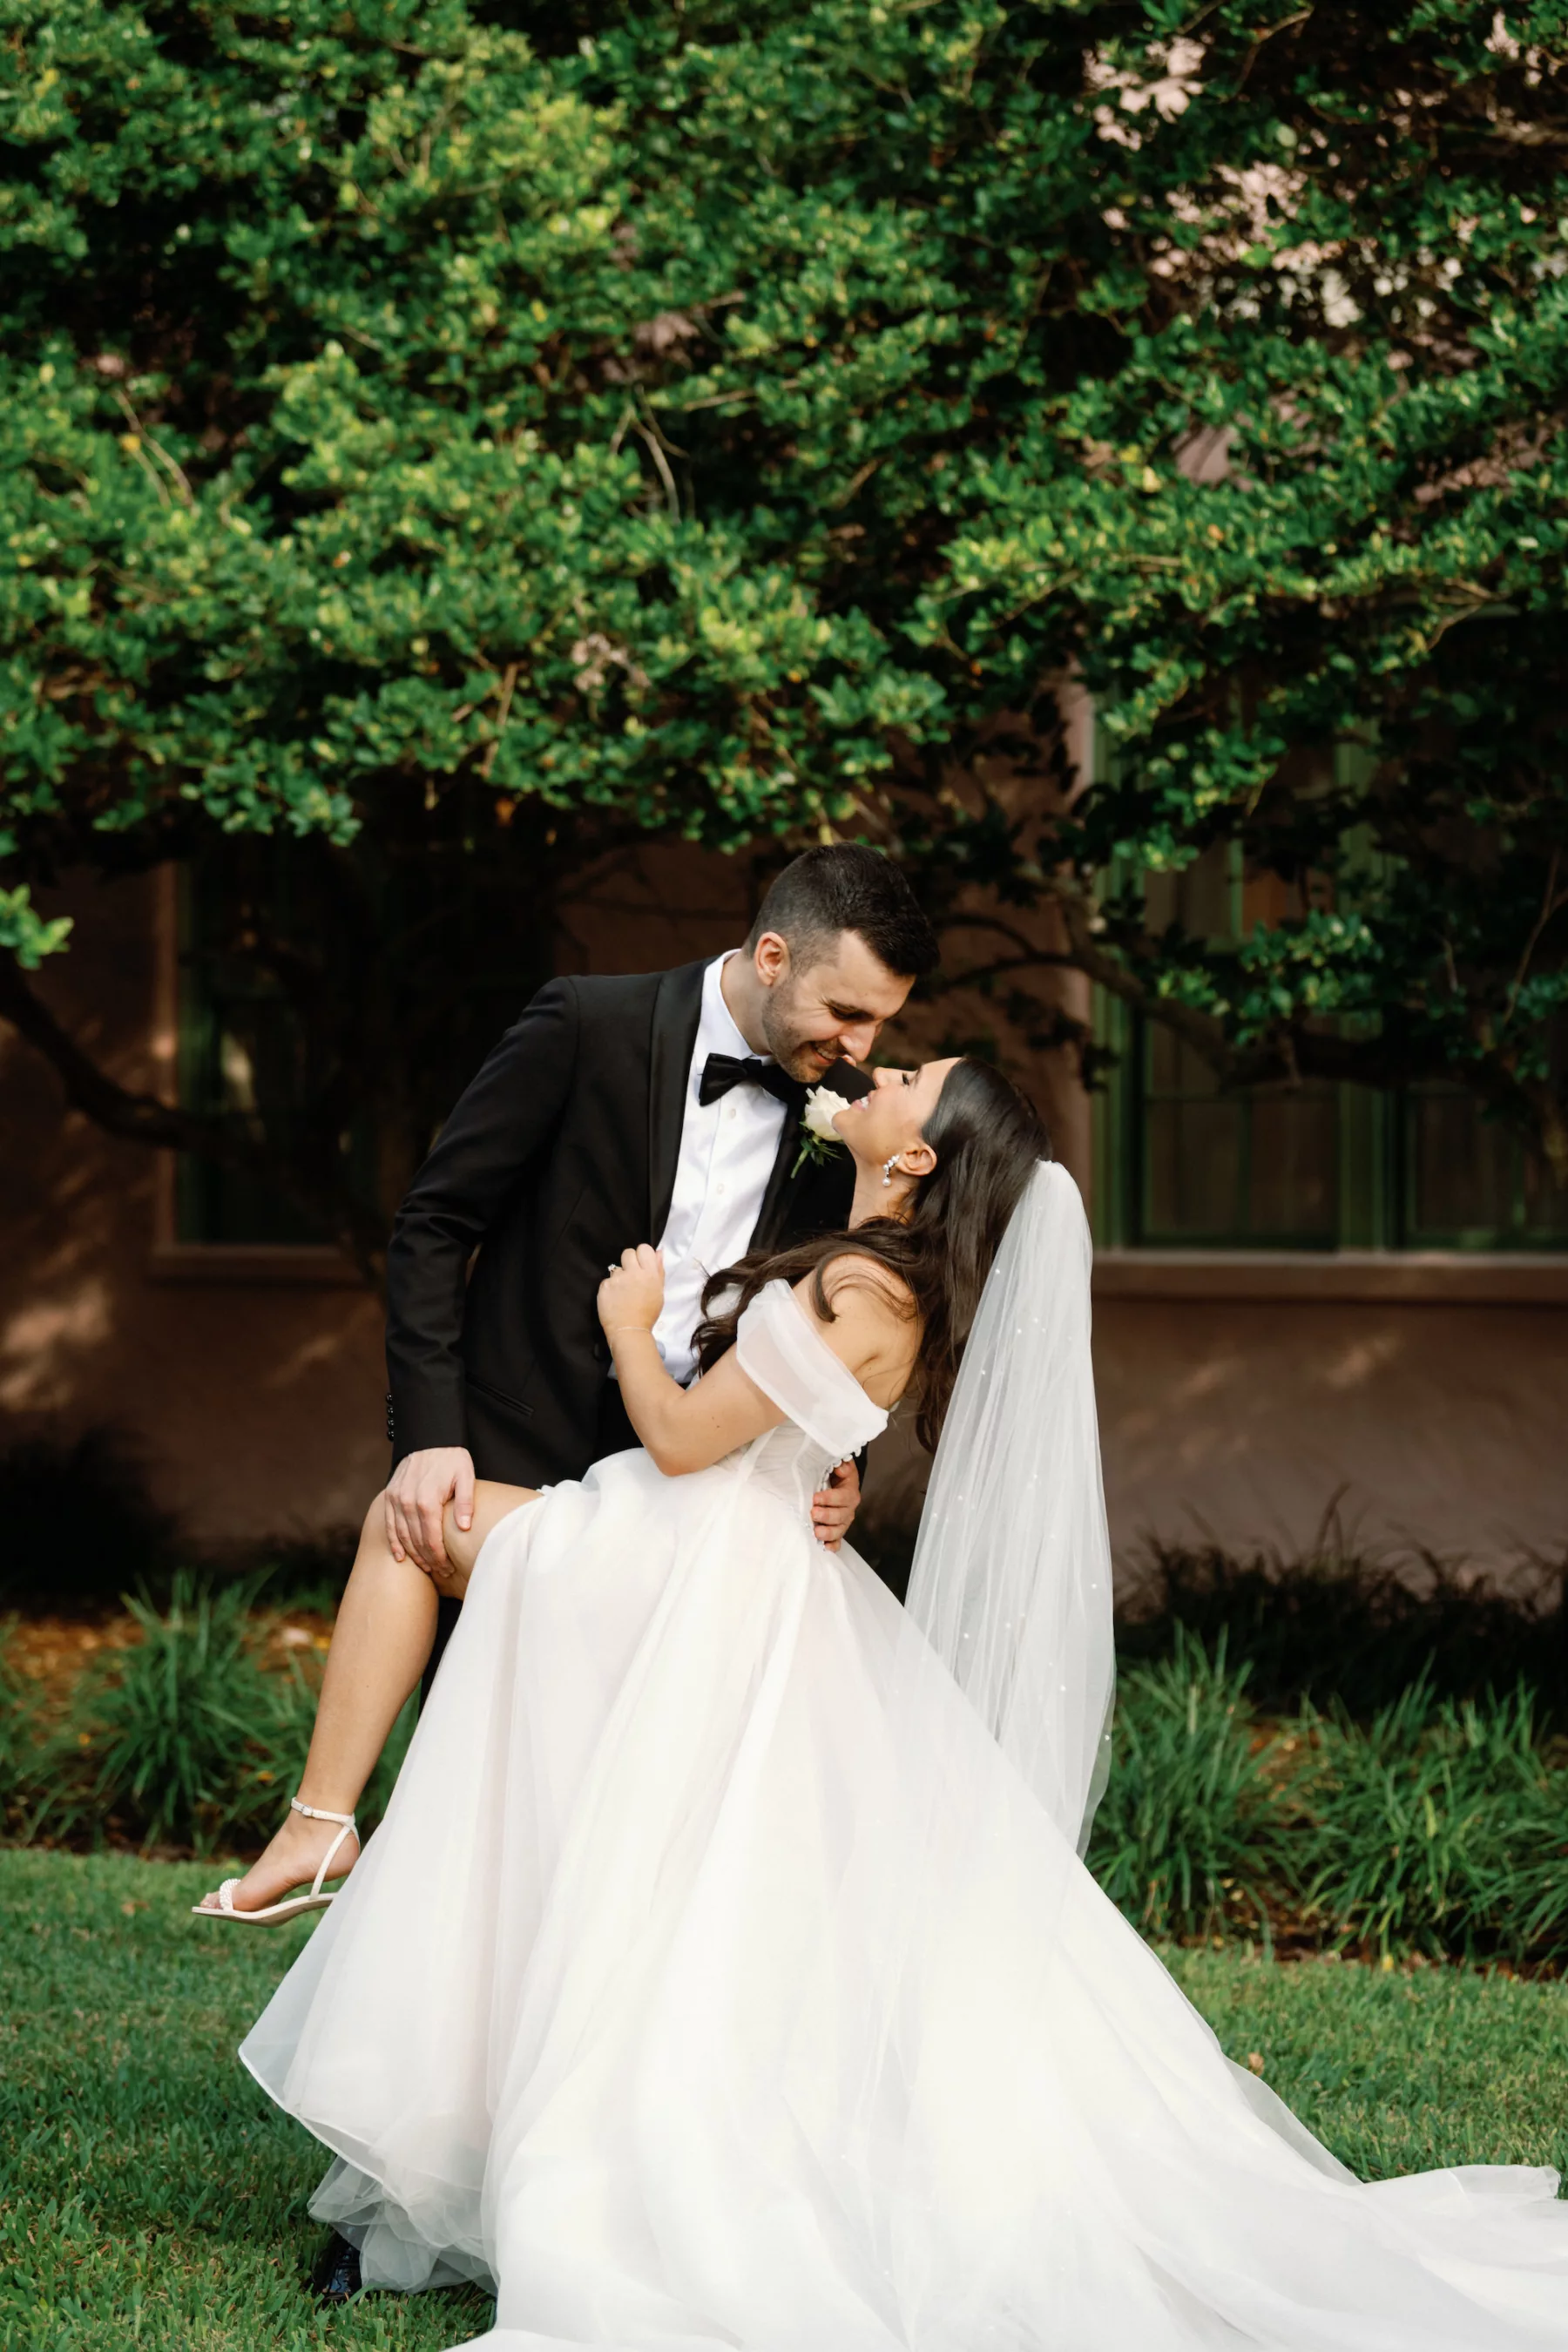 Romantic Bride and Groom Wedding Portrait | Tampa Bay Photographer Dewitt For Love Photography